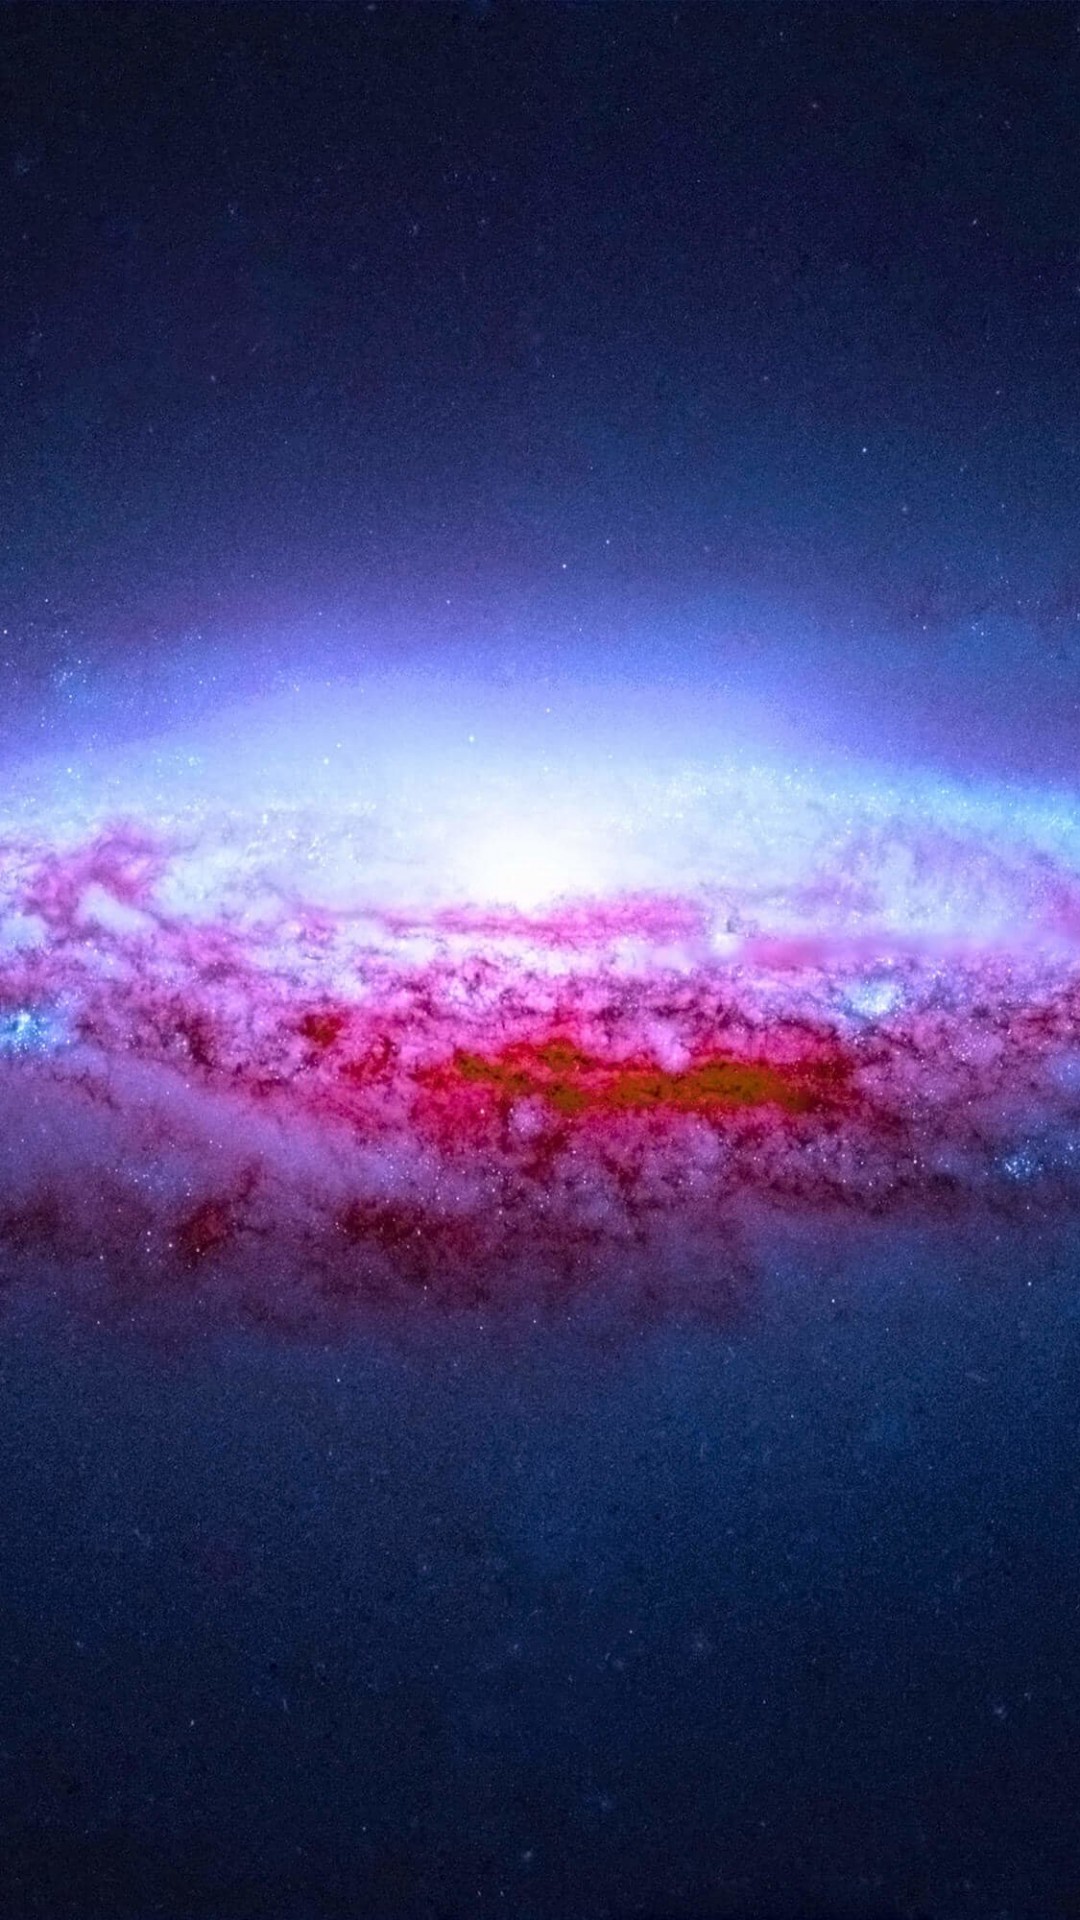 NGC 2683 Spiral Galaxy Wallpaper for SONY Xperia Z2